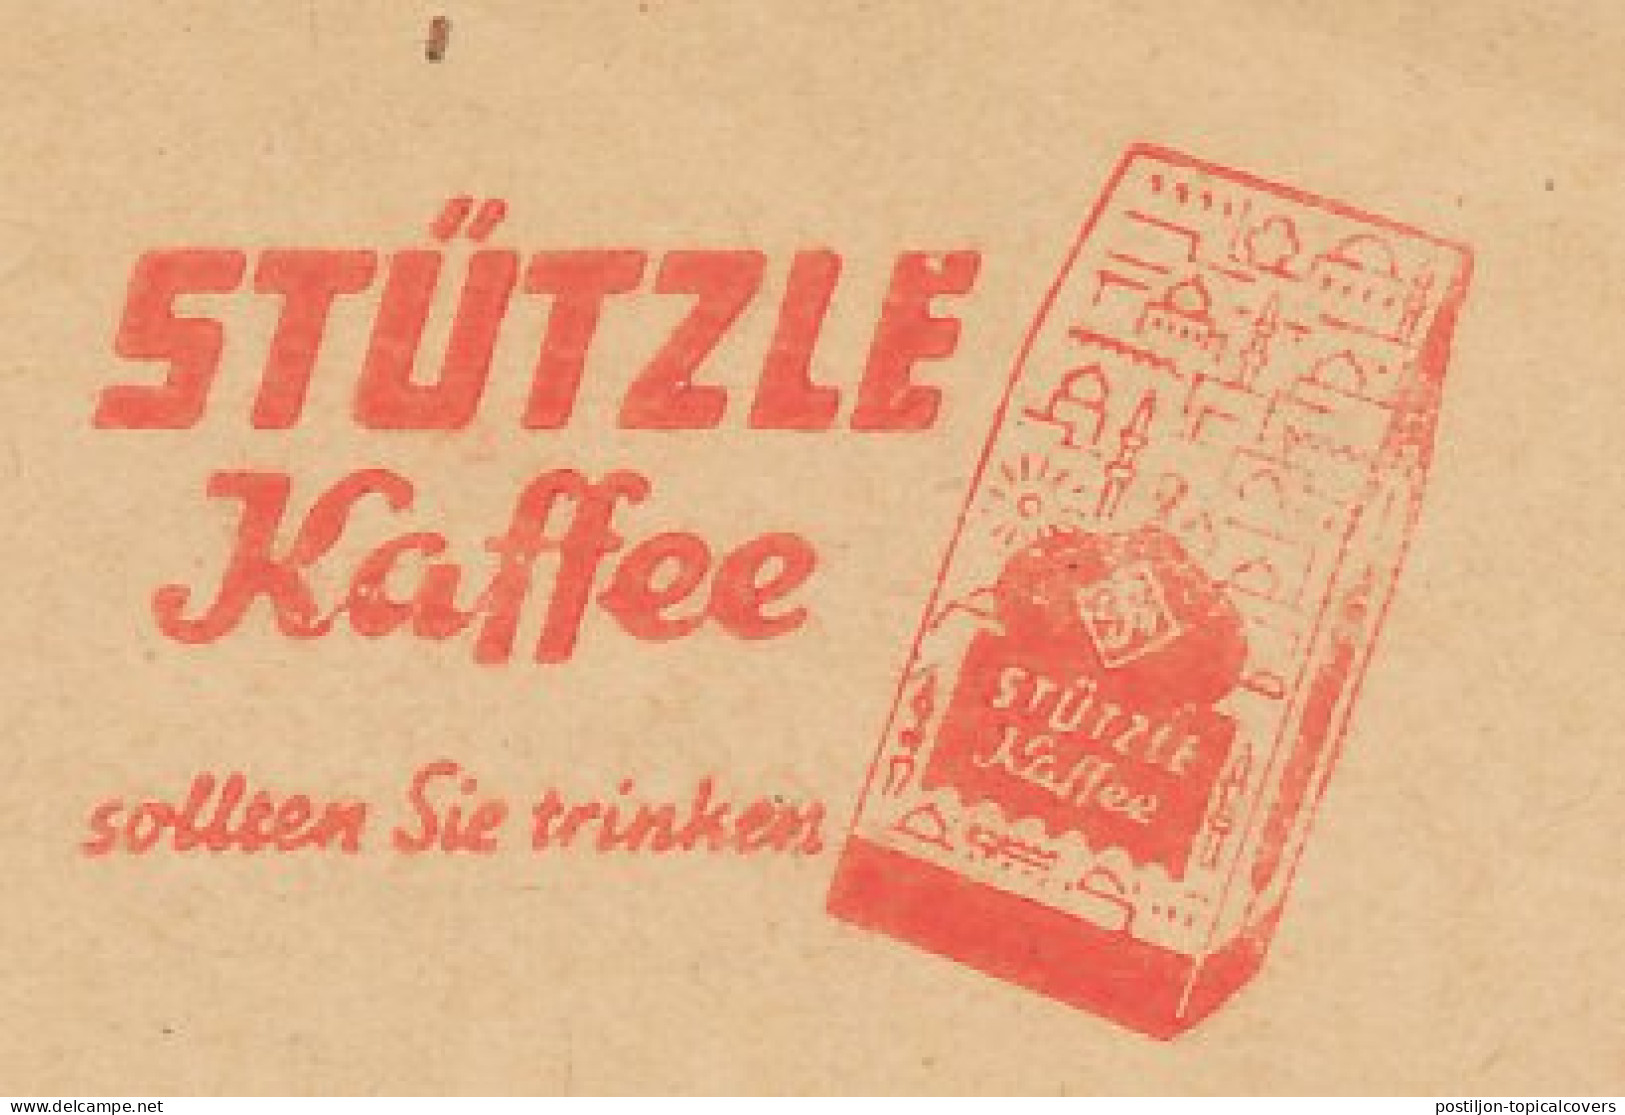 Meter Cut Germany 1961 Coffee - Stutzle - Other & Unclassified